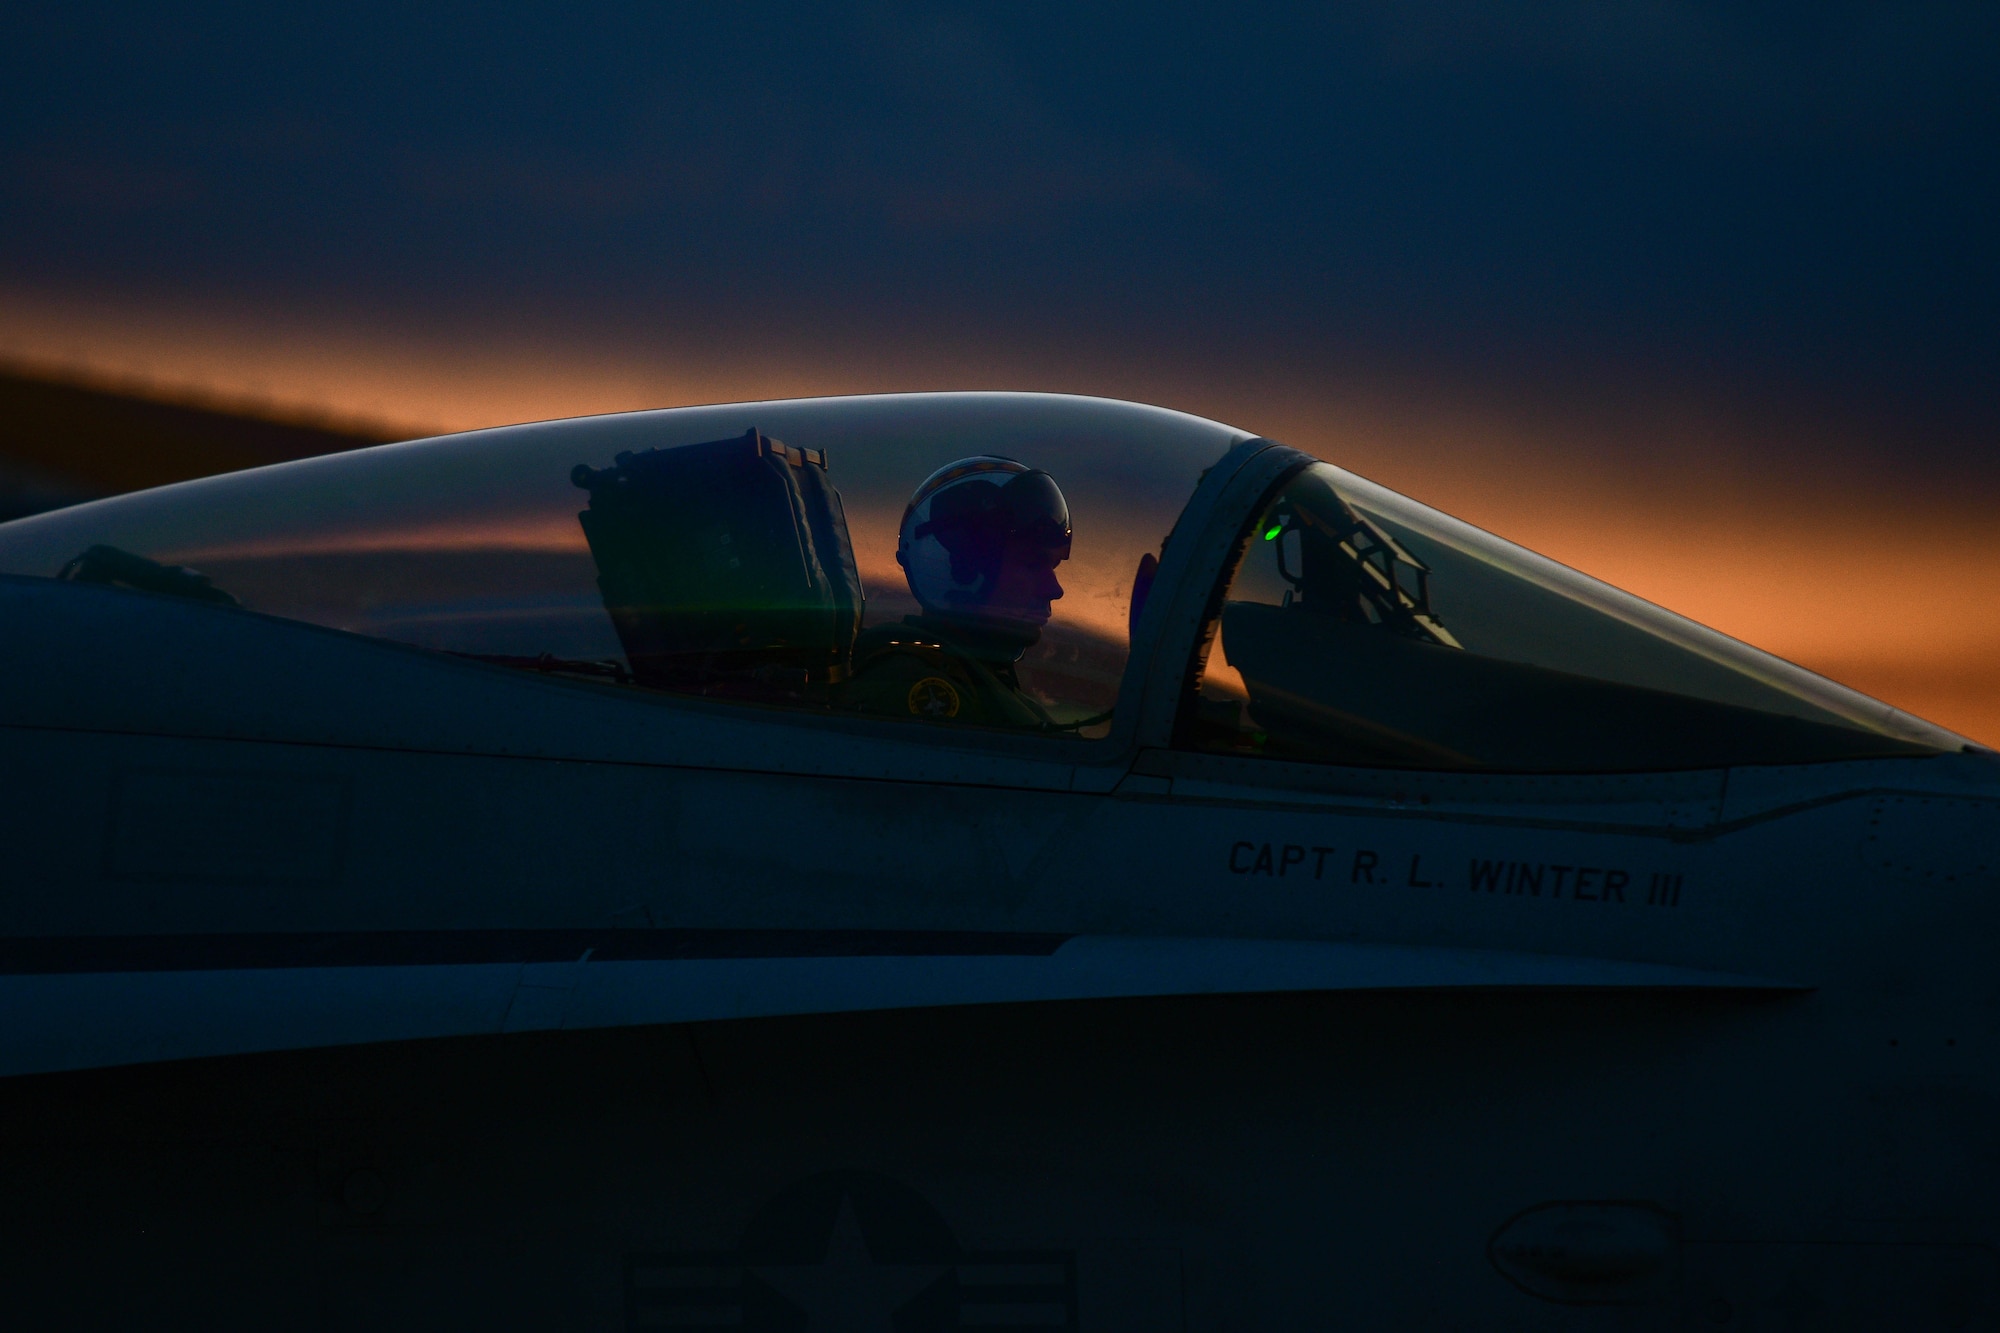 A United States Marine Corps F/A-18 Hornet pilot assigned to the Marine Fighter Attack Squadron 323 based out of Marine Corps Air Station Miramar, California, prepares for a training sortie at Aviano Air Base, Italy, Sept. 20, 2022. The VMFA-323 Squadron integrated with the 510th Fighter Squadron and practiced dogfighting, where one F-16 would be paired with one F-18 and whoever gets "gunned" loses. (U.S. Air Force photo by Senior Airman Brooke Moeder)